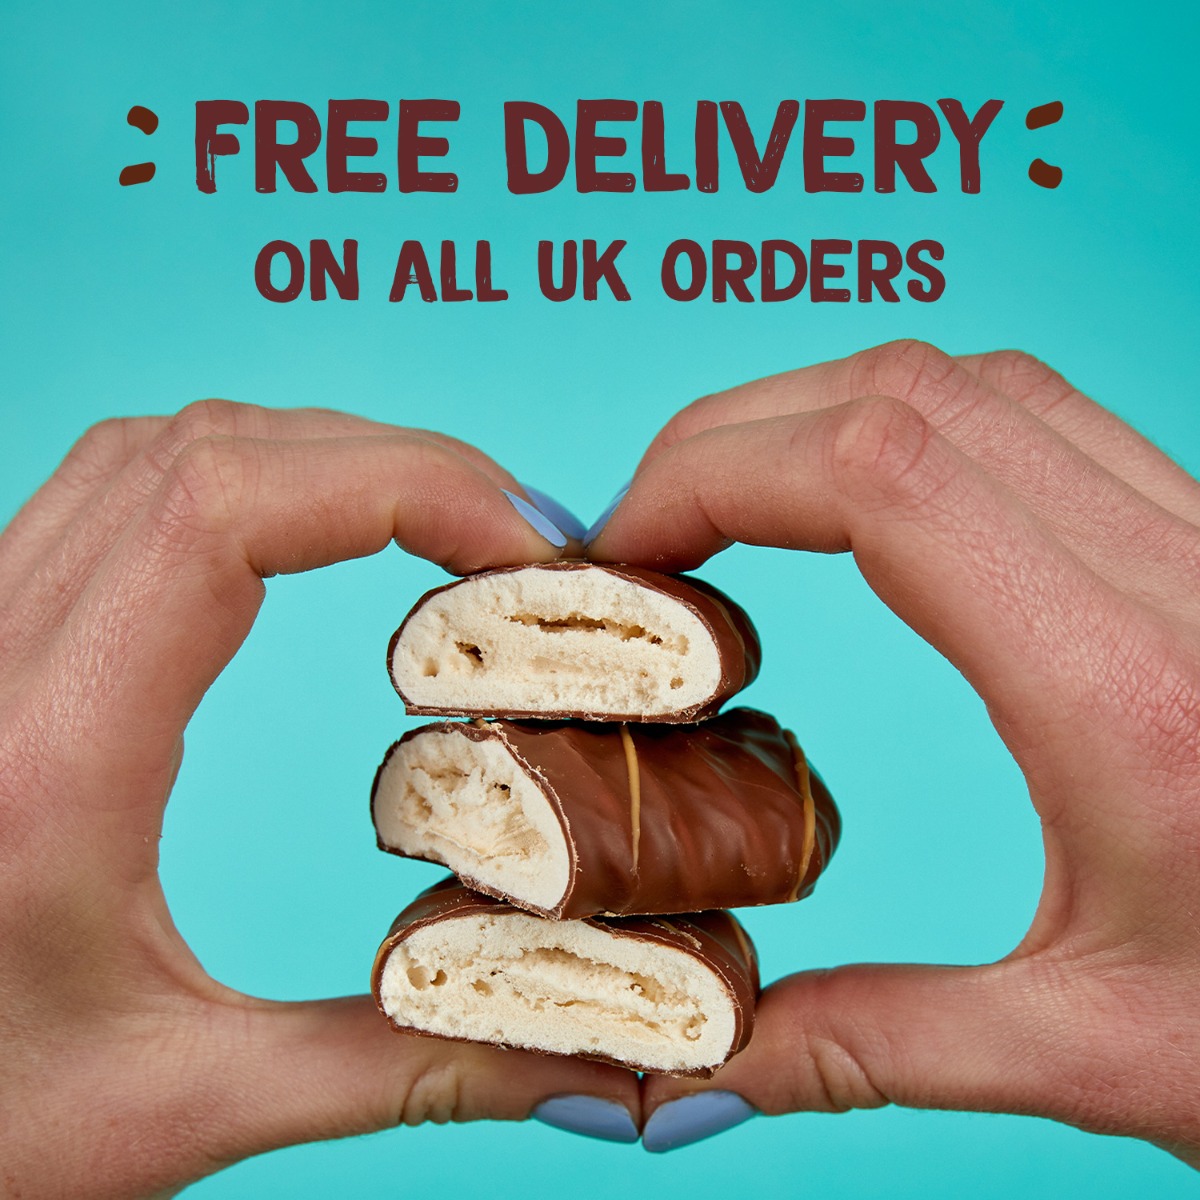 Free delivery on all UK orders